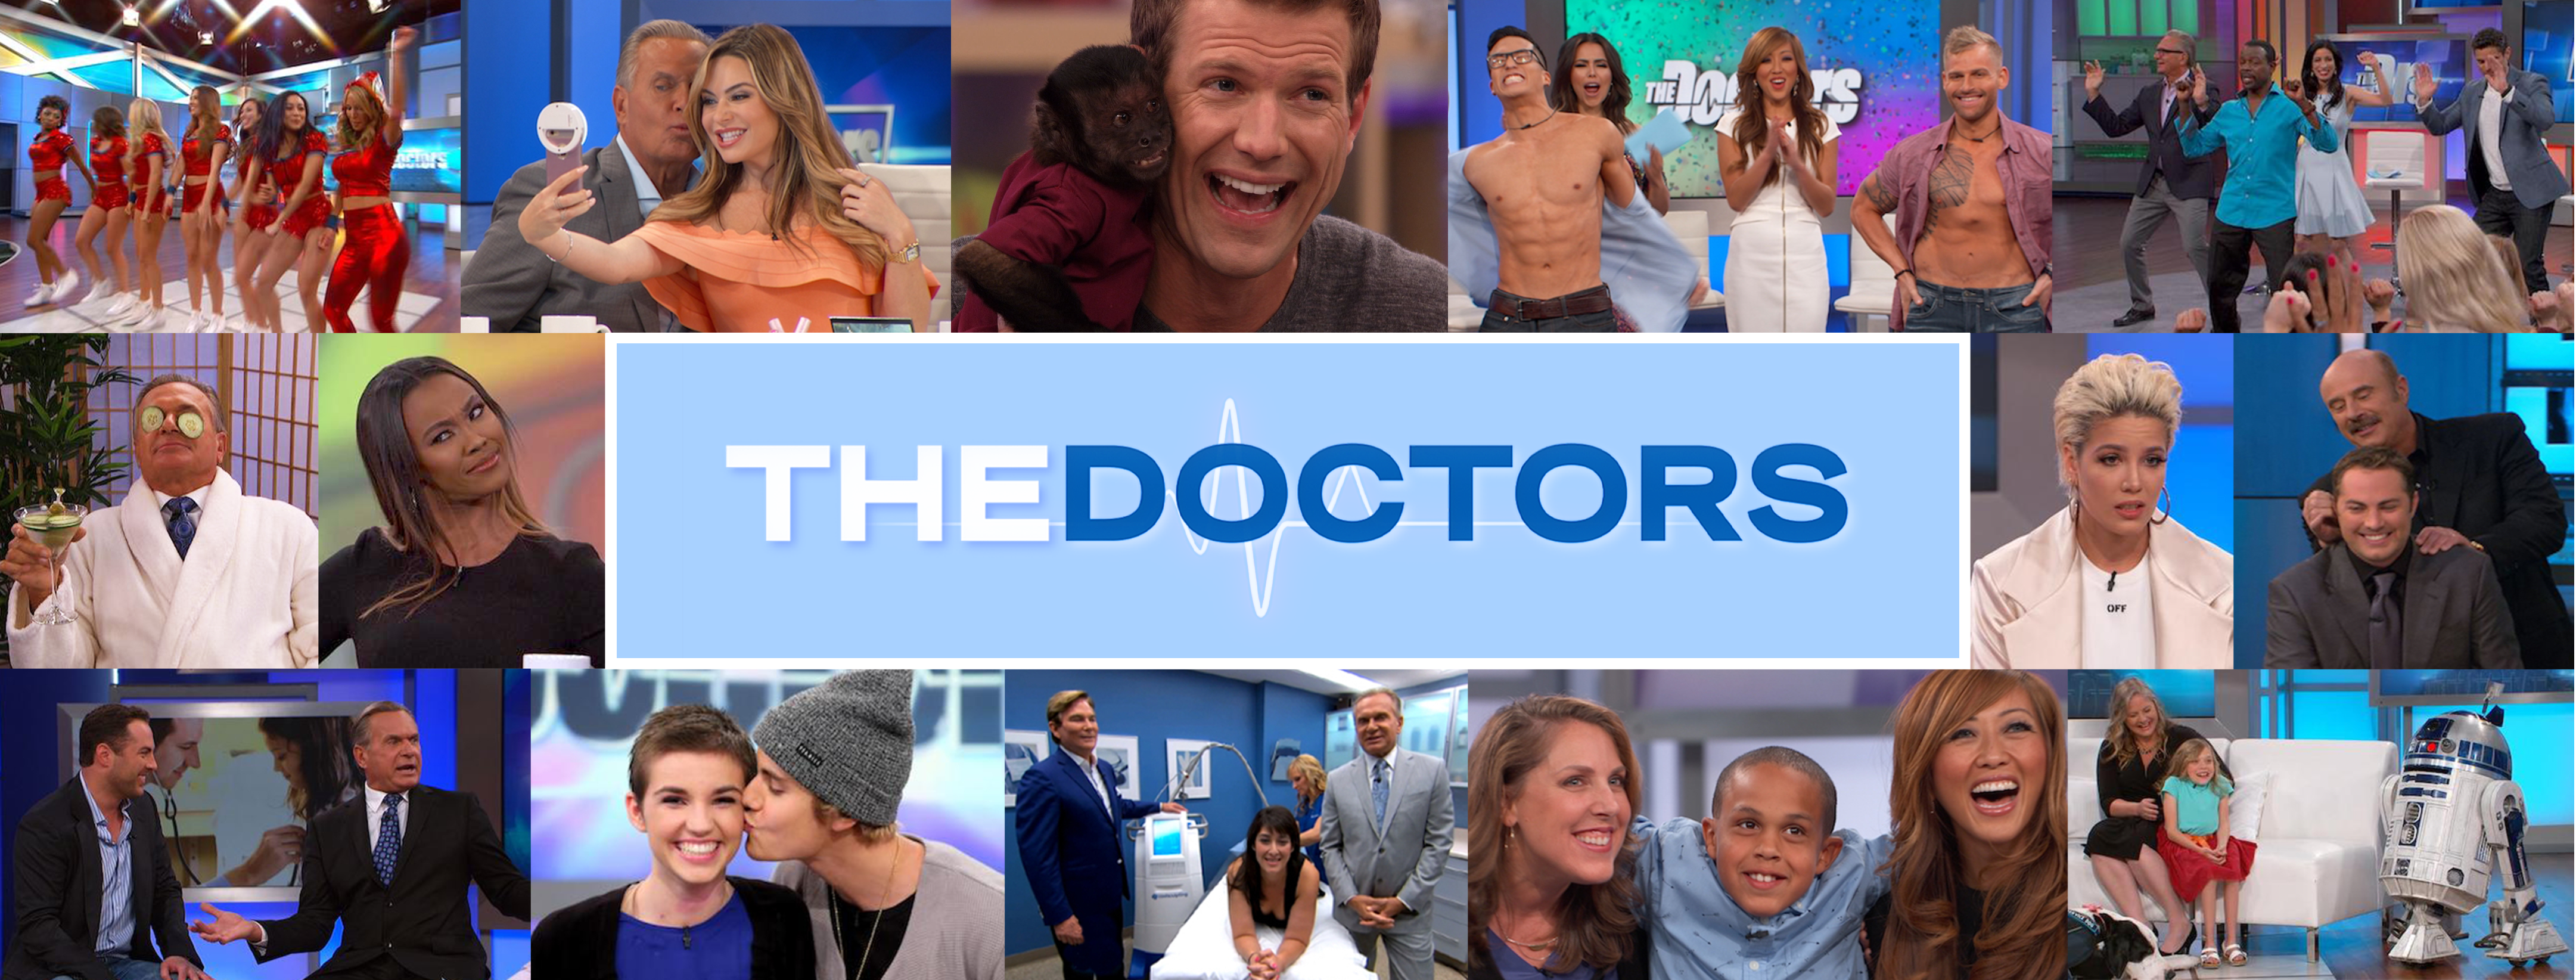 Trick and Treat Your Body Healthy | The Doctors TV Show